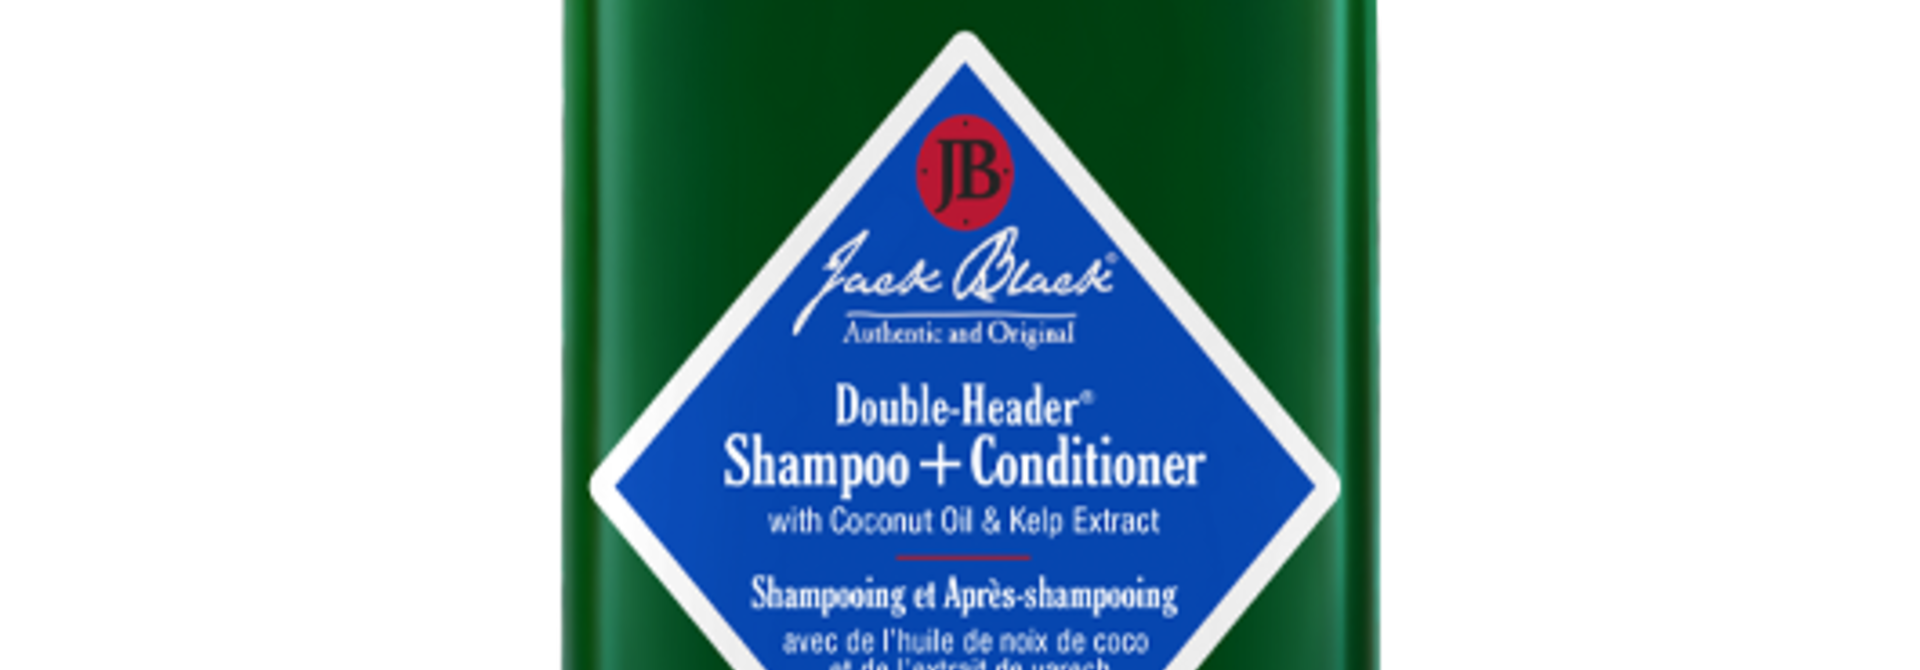 Double-Header Shampoo & Conditioner | The Hair Care Collection